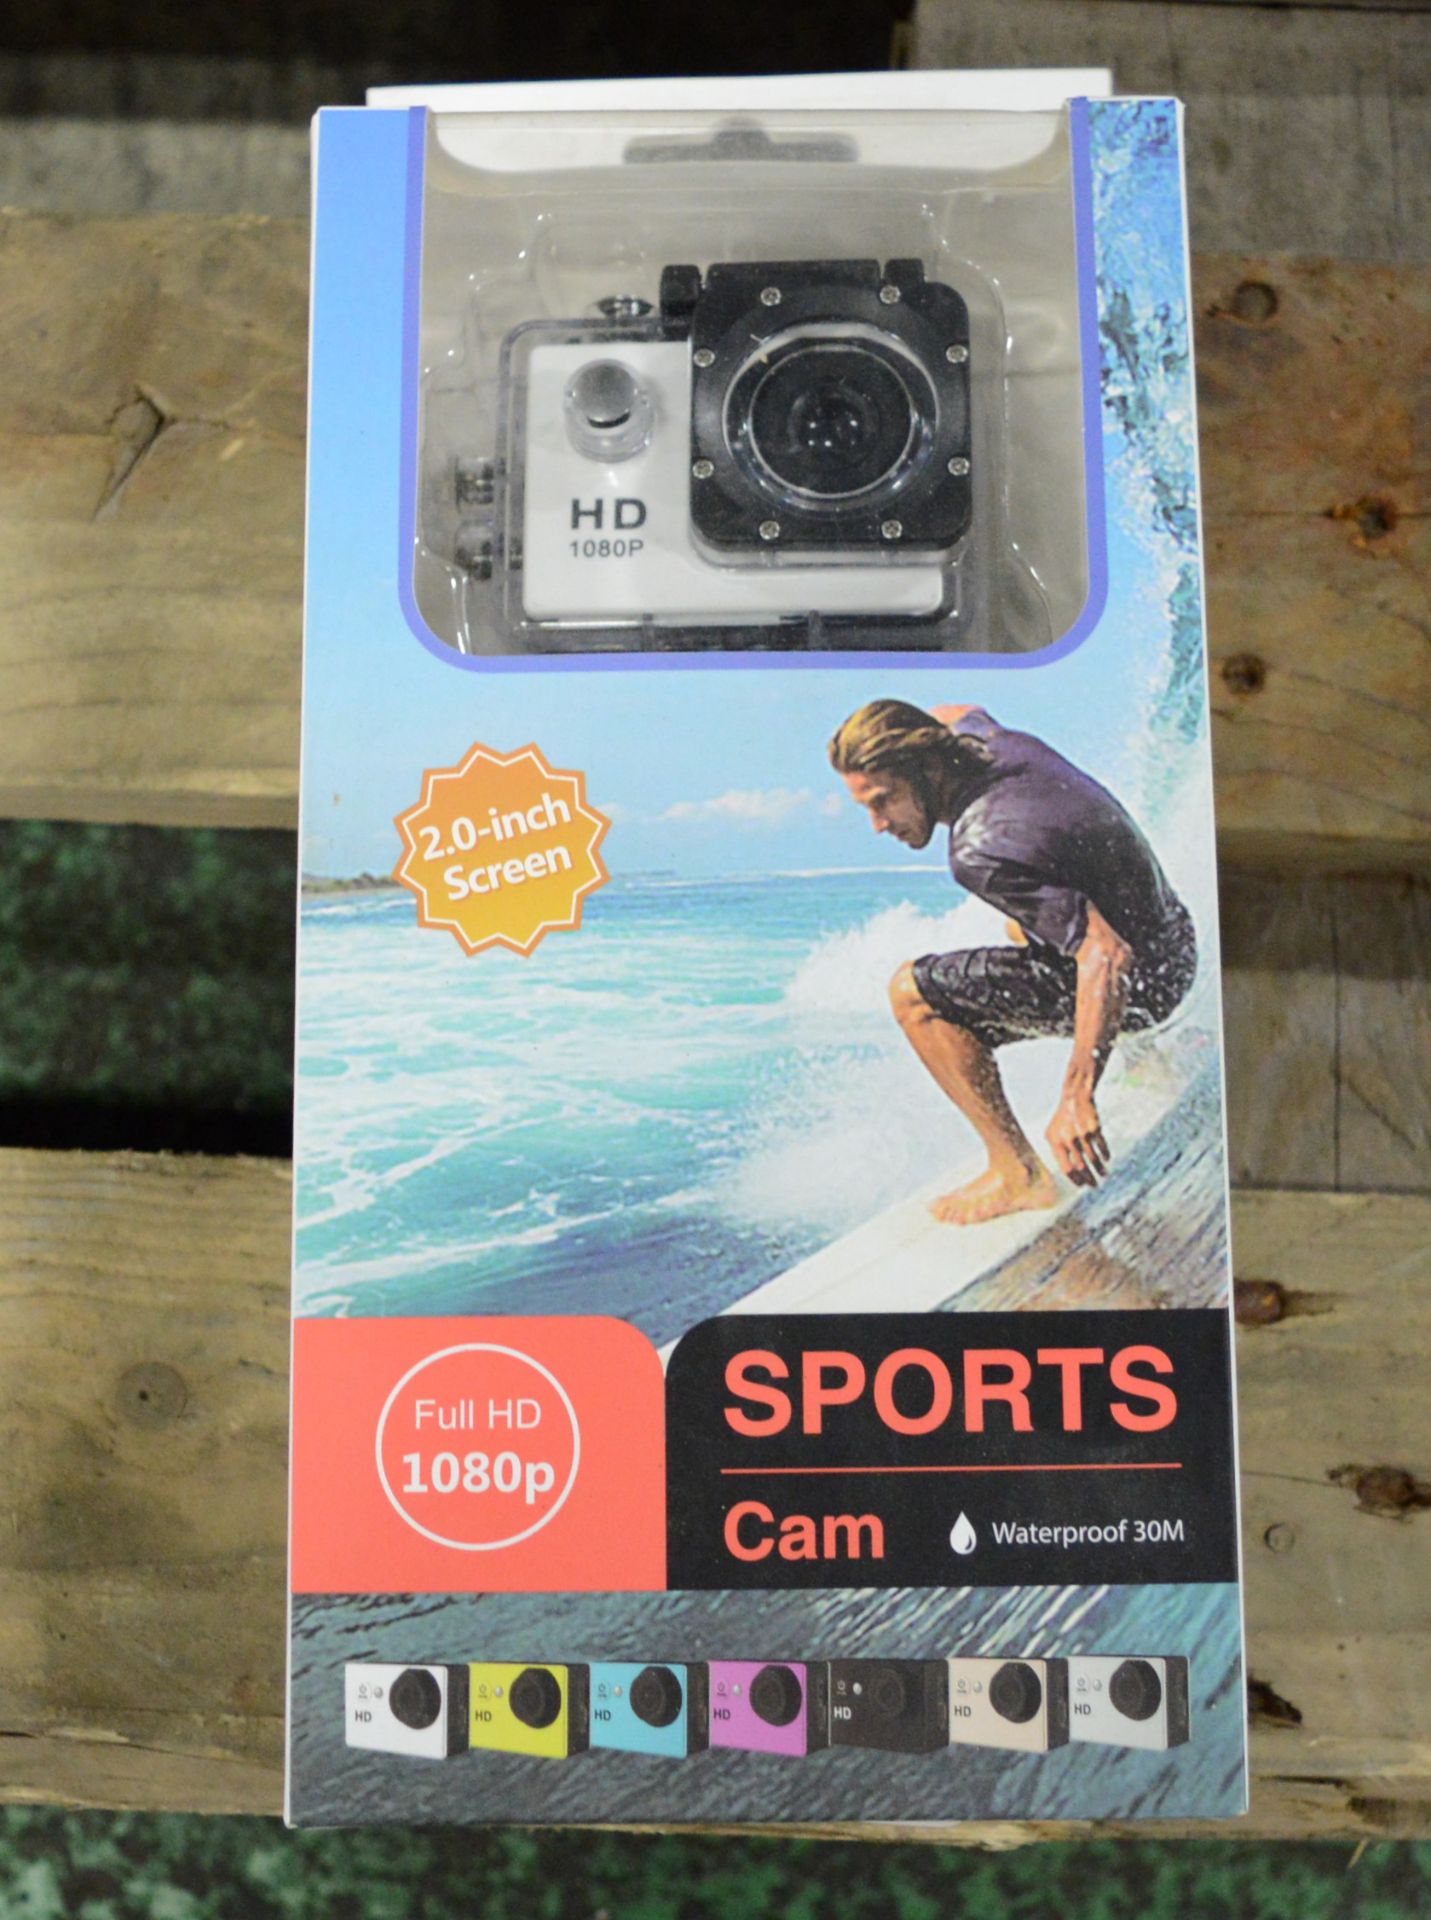 Sports / Action Camera (GoPro Equivalent) 1080p 2" Screen.